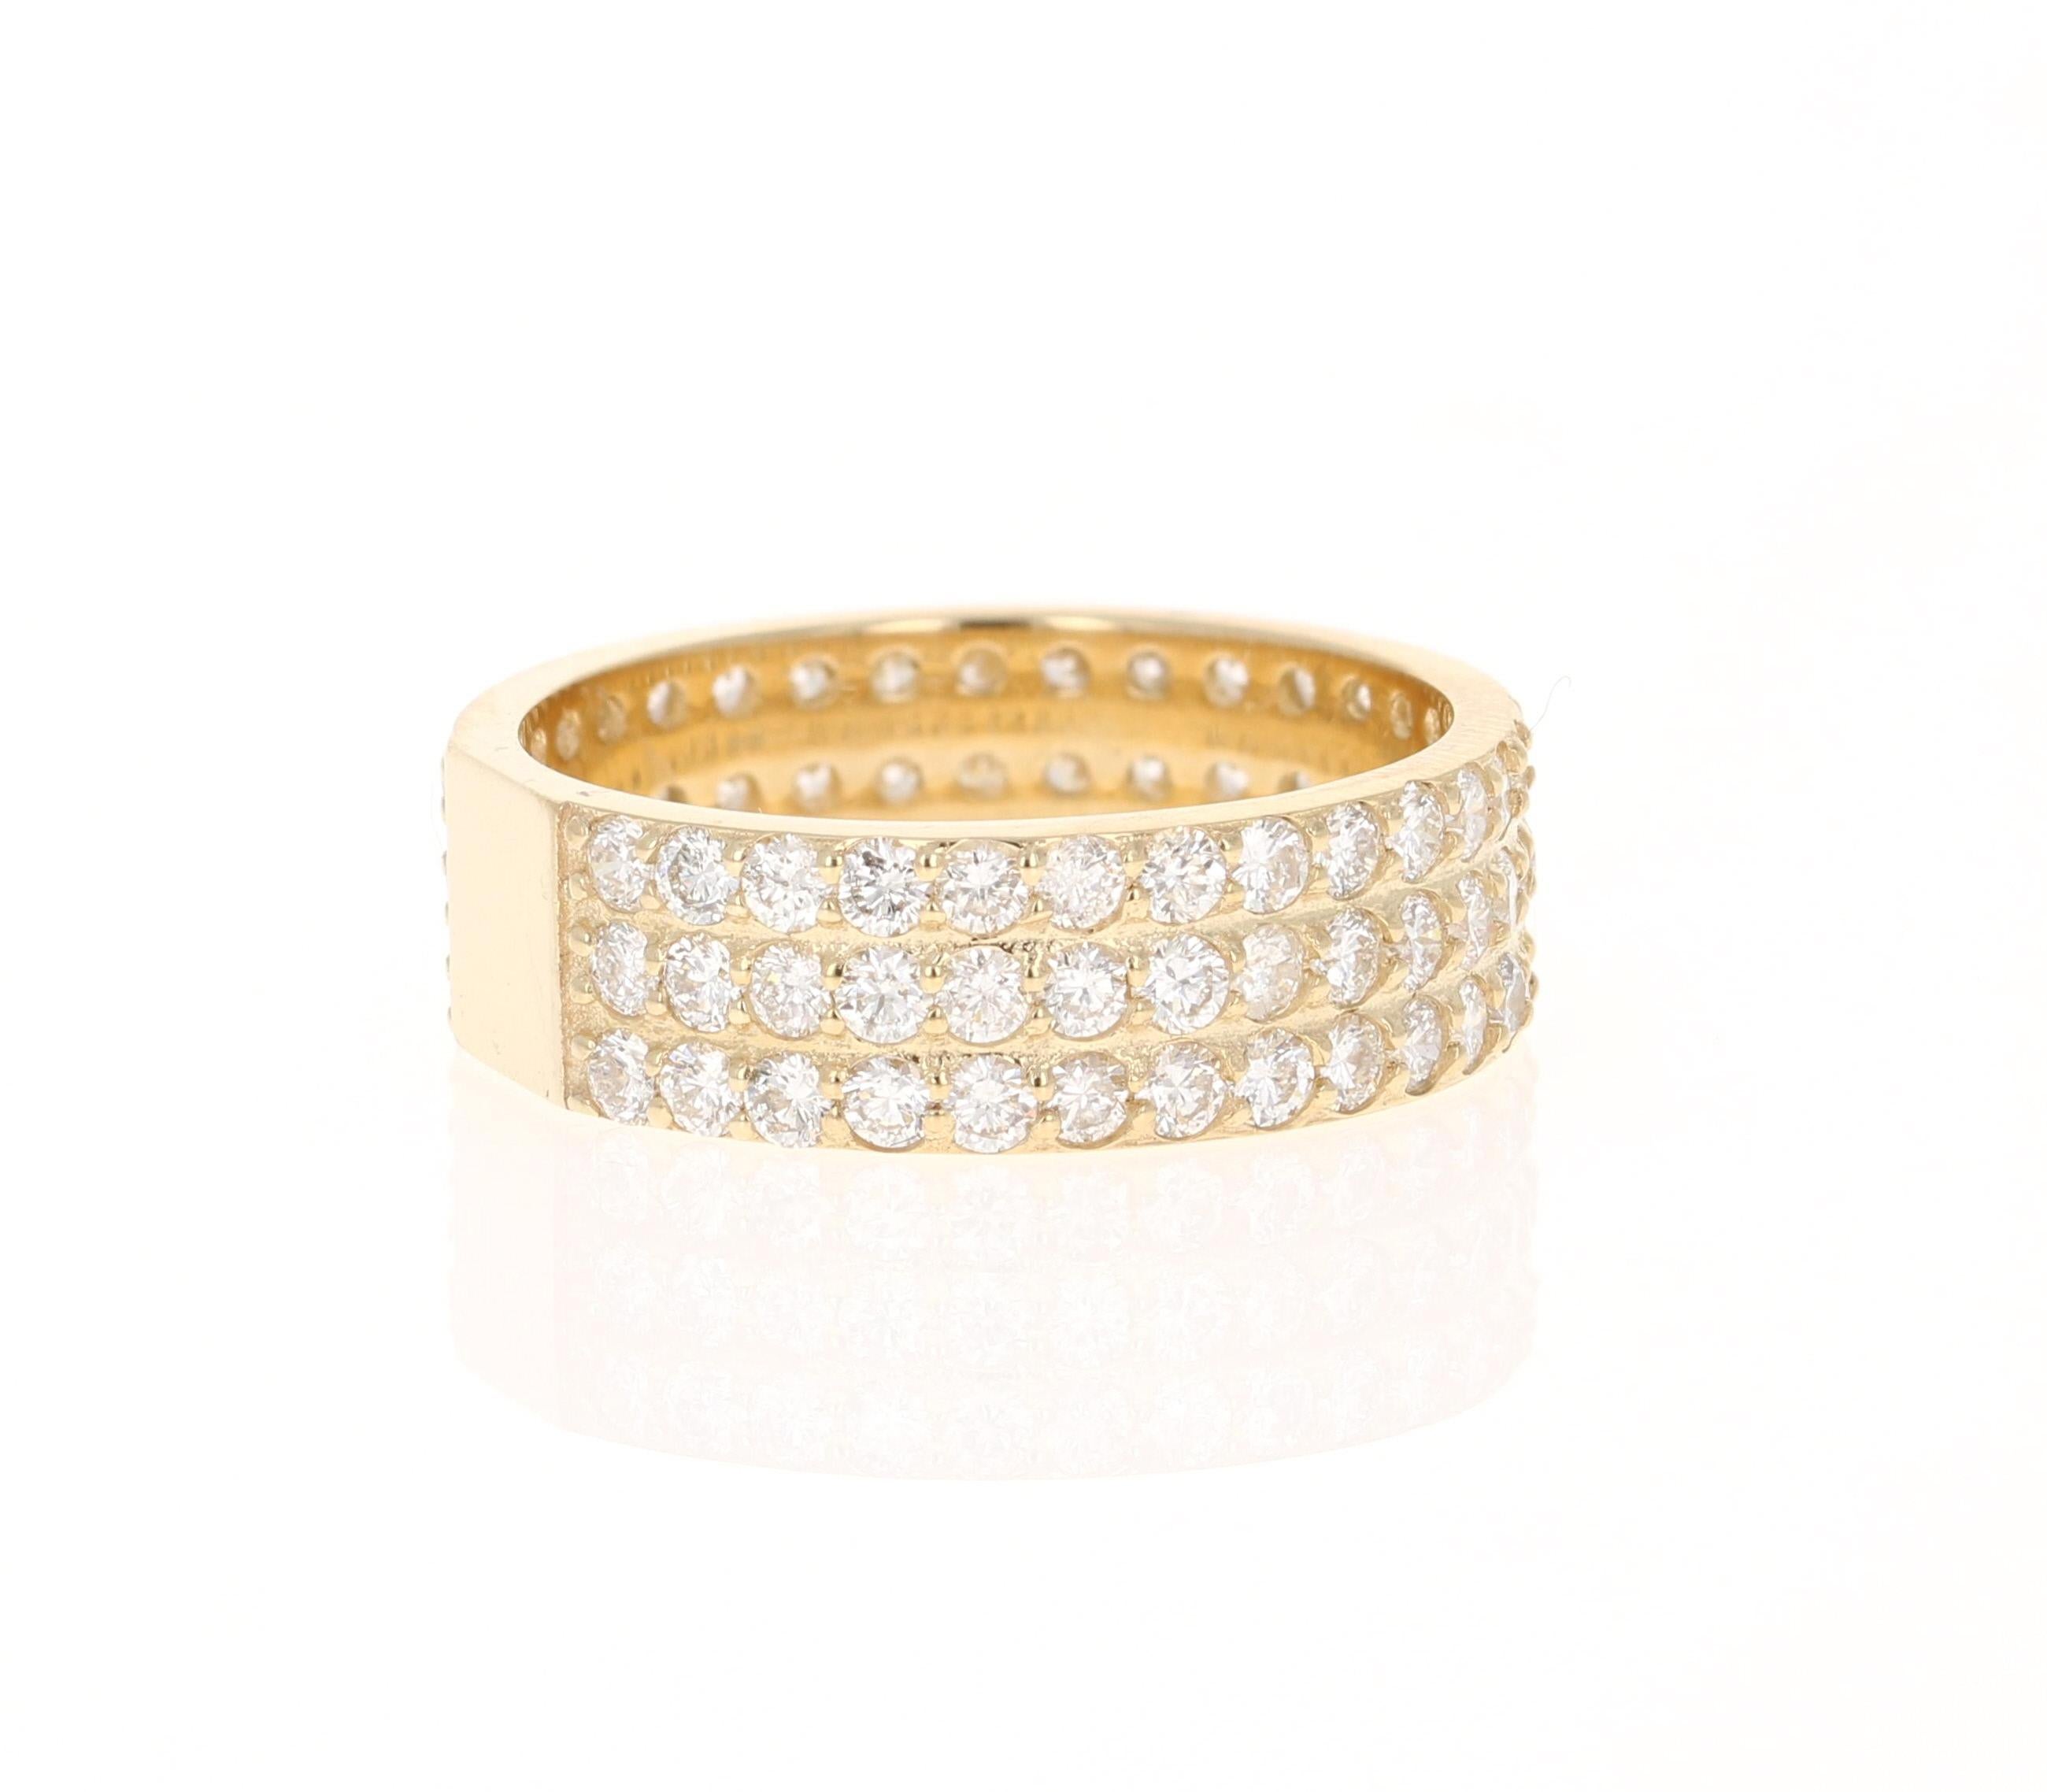 This ring has 90 Round Cut Diamonds that weigh 2.22 Carats (Clarity: VS, Color: H) 
It has a gold gram weight of approximately 5.3 grams and is set in 14 Karat Yellow Gold.
Ring size is 7 and can be re-sized, free of charge.